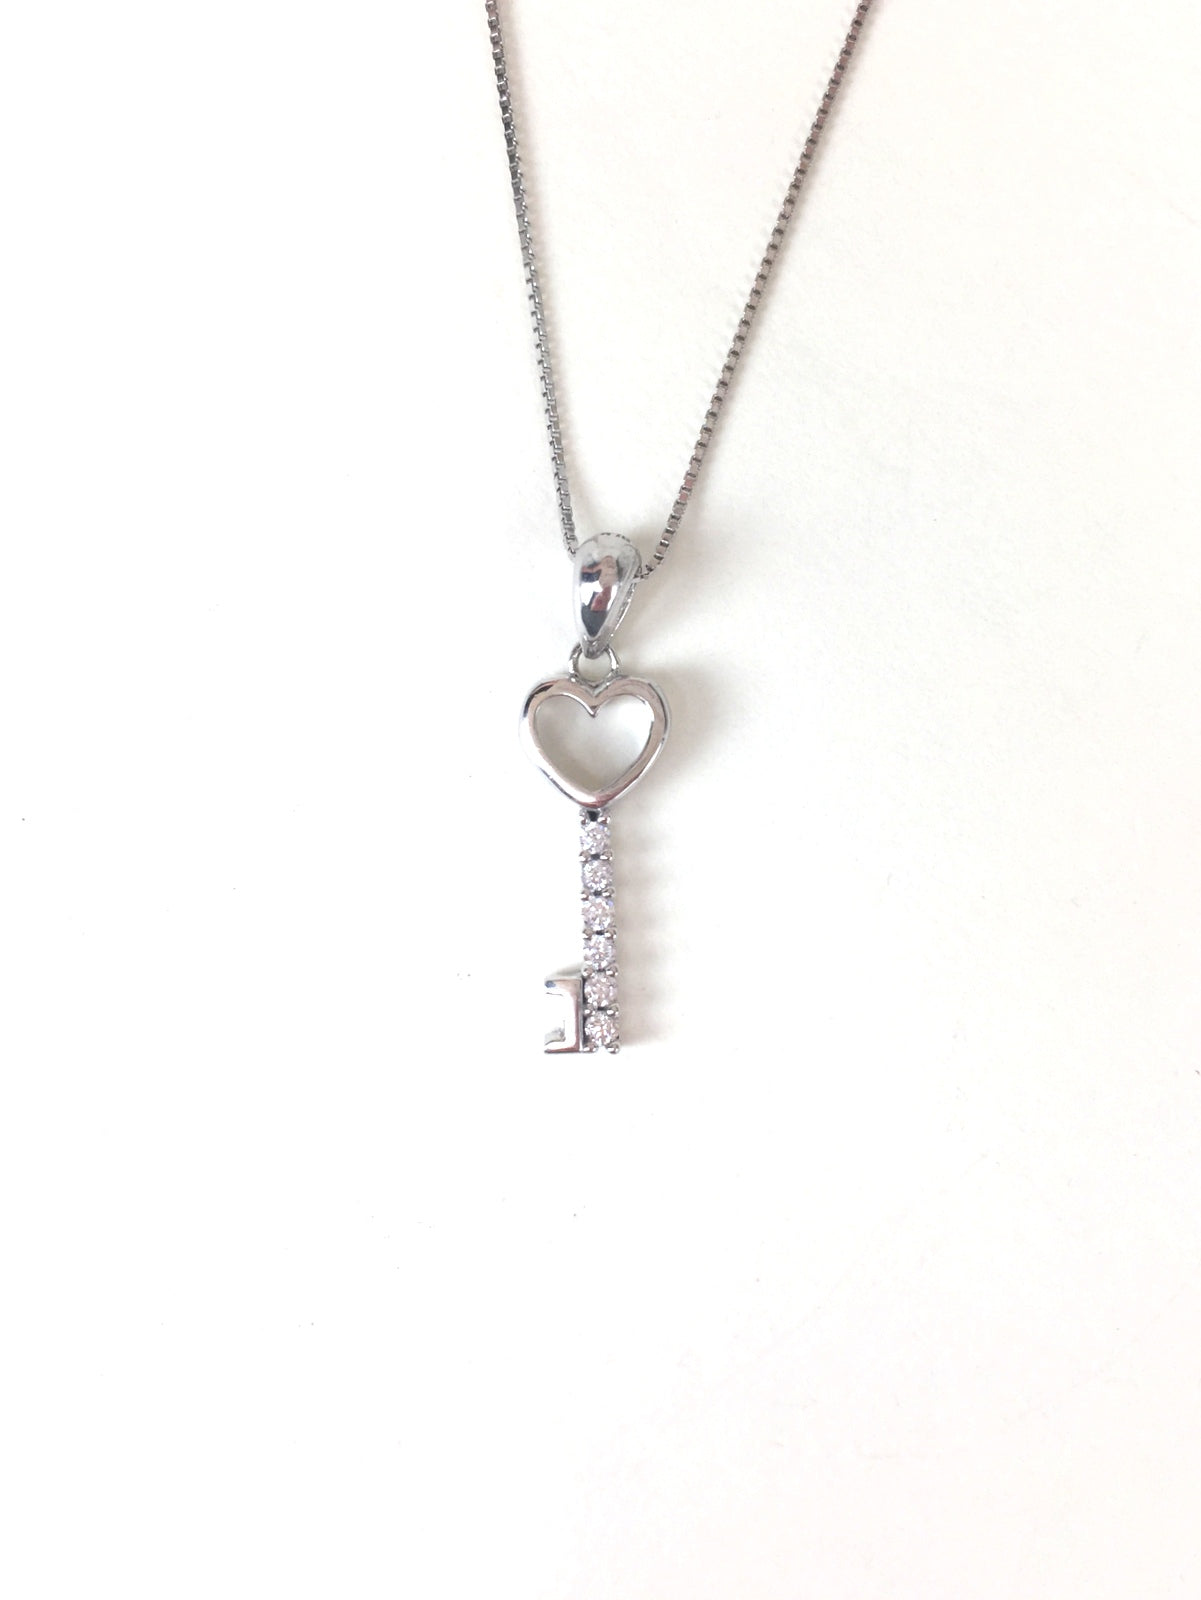 SMALL HEART KEY PAVE CZ STERLING SILVER NECKLACE